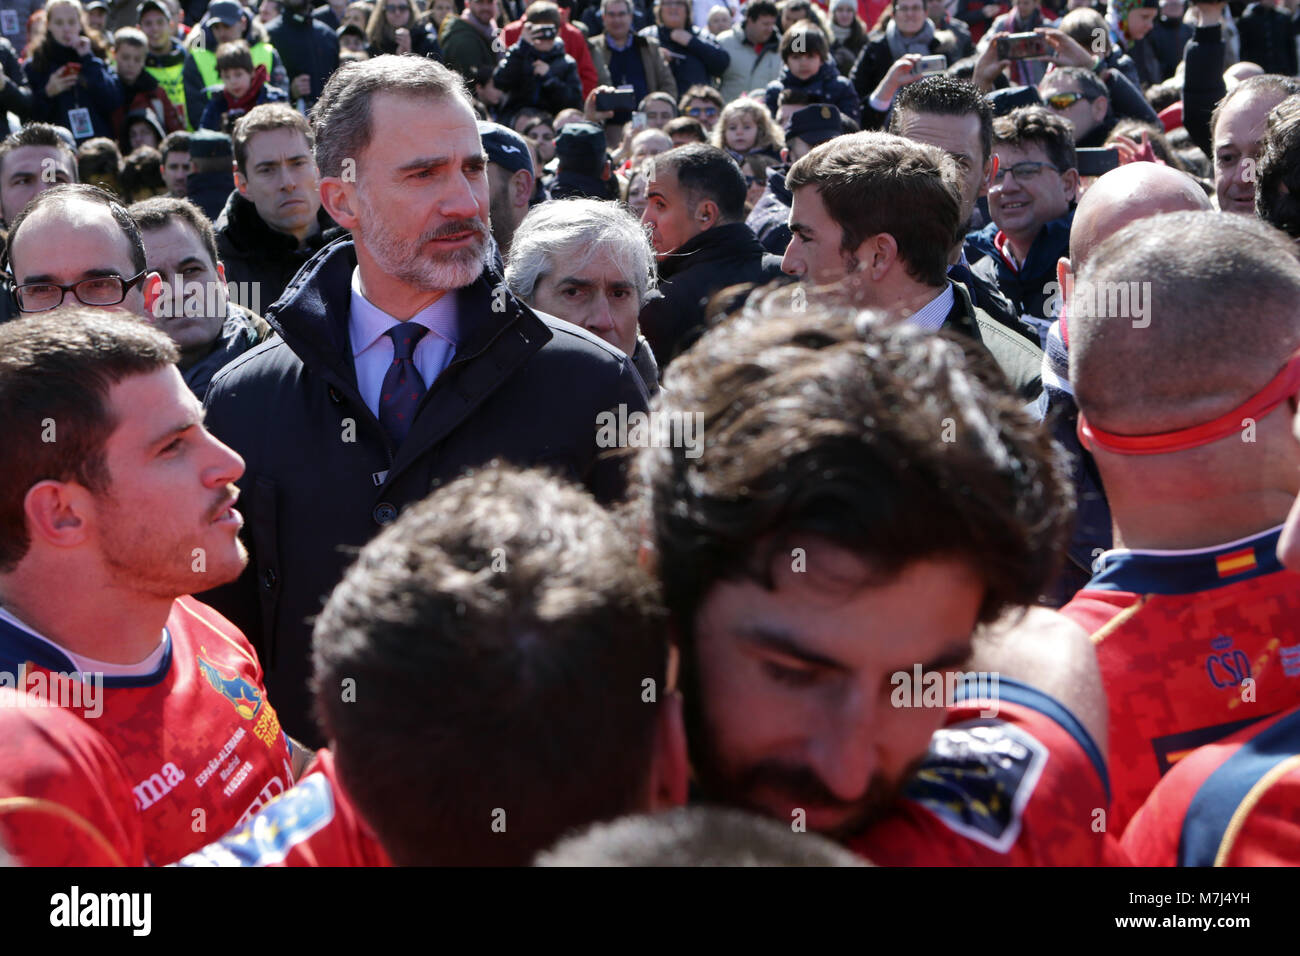 Madrid, Spain. 11th March, 2018. Spanish King Felipe VI during the match of rugby between Spain vs Germany in the Central of Complutense Madrid on Sunday 11 March 2018. Spain won (84-10) Germany. Credit: Gtres Información más Comuniación on line, S.L./Alamy Live News Stock Photo